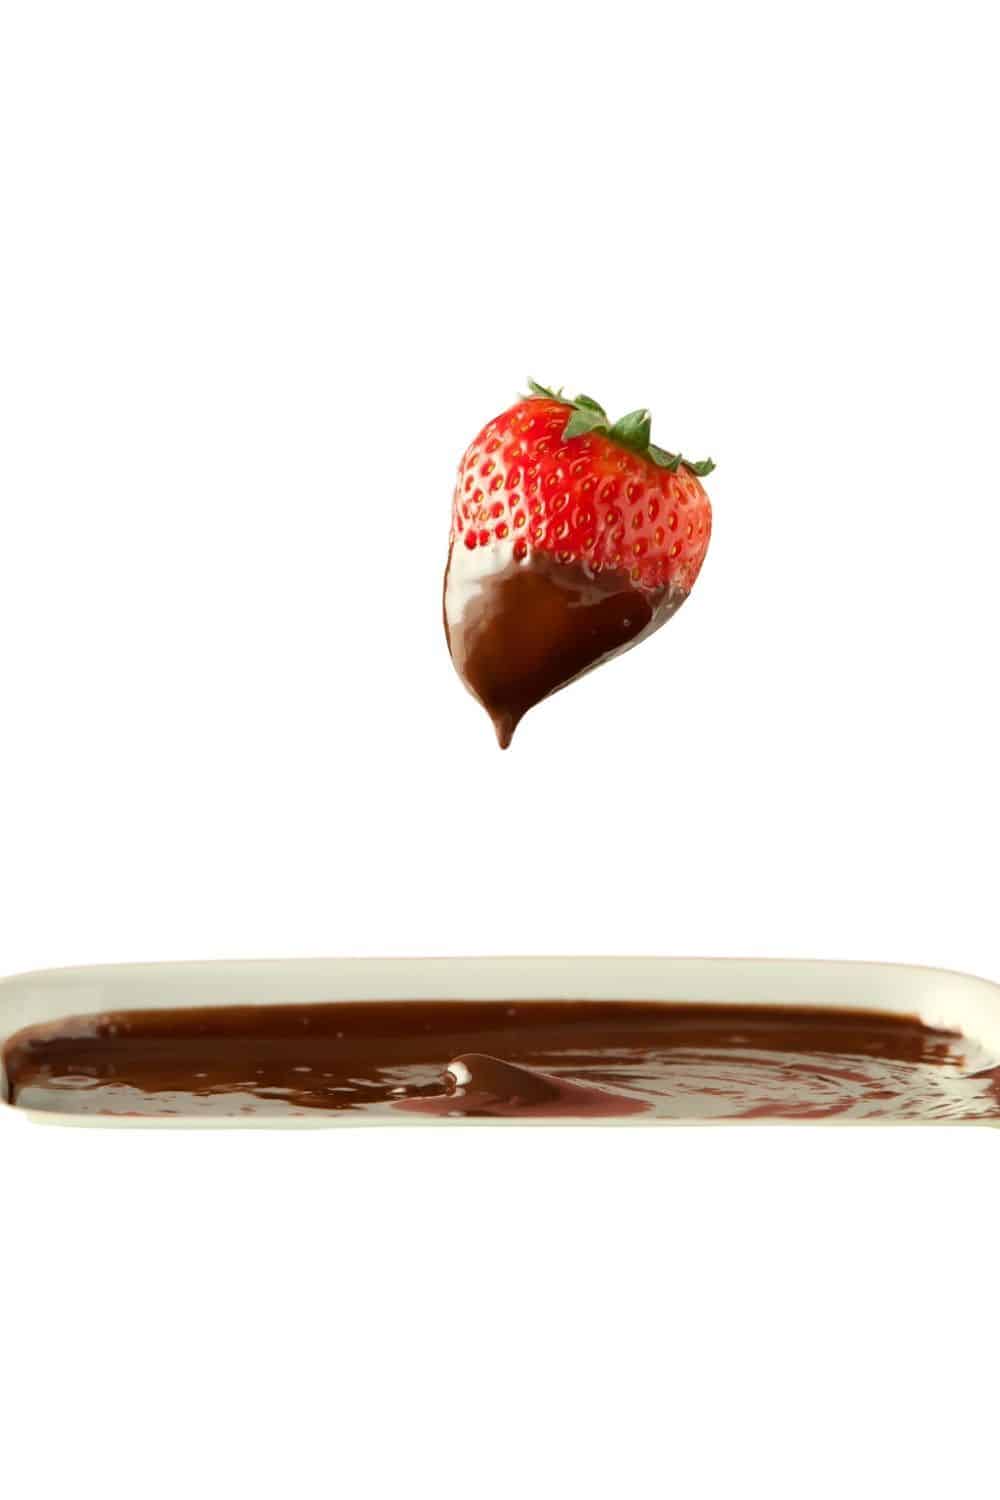 Chocolate ganache for dipping strawberries